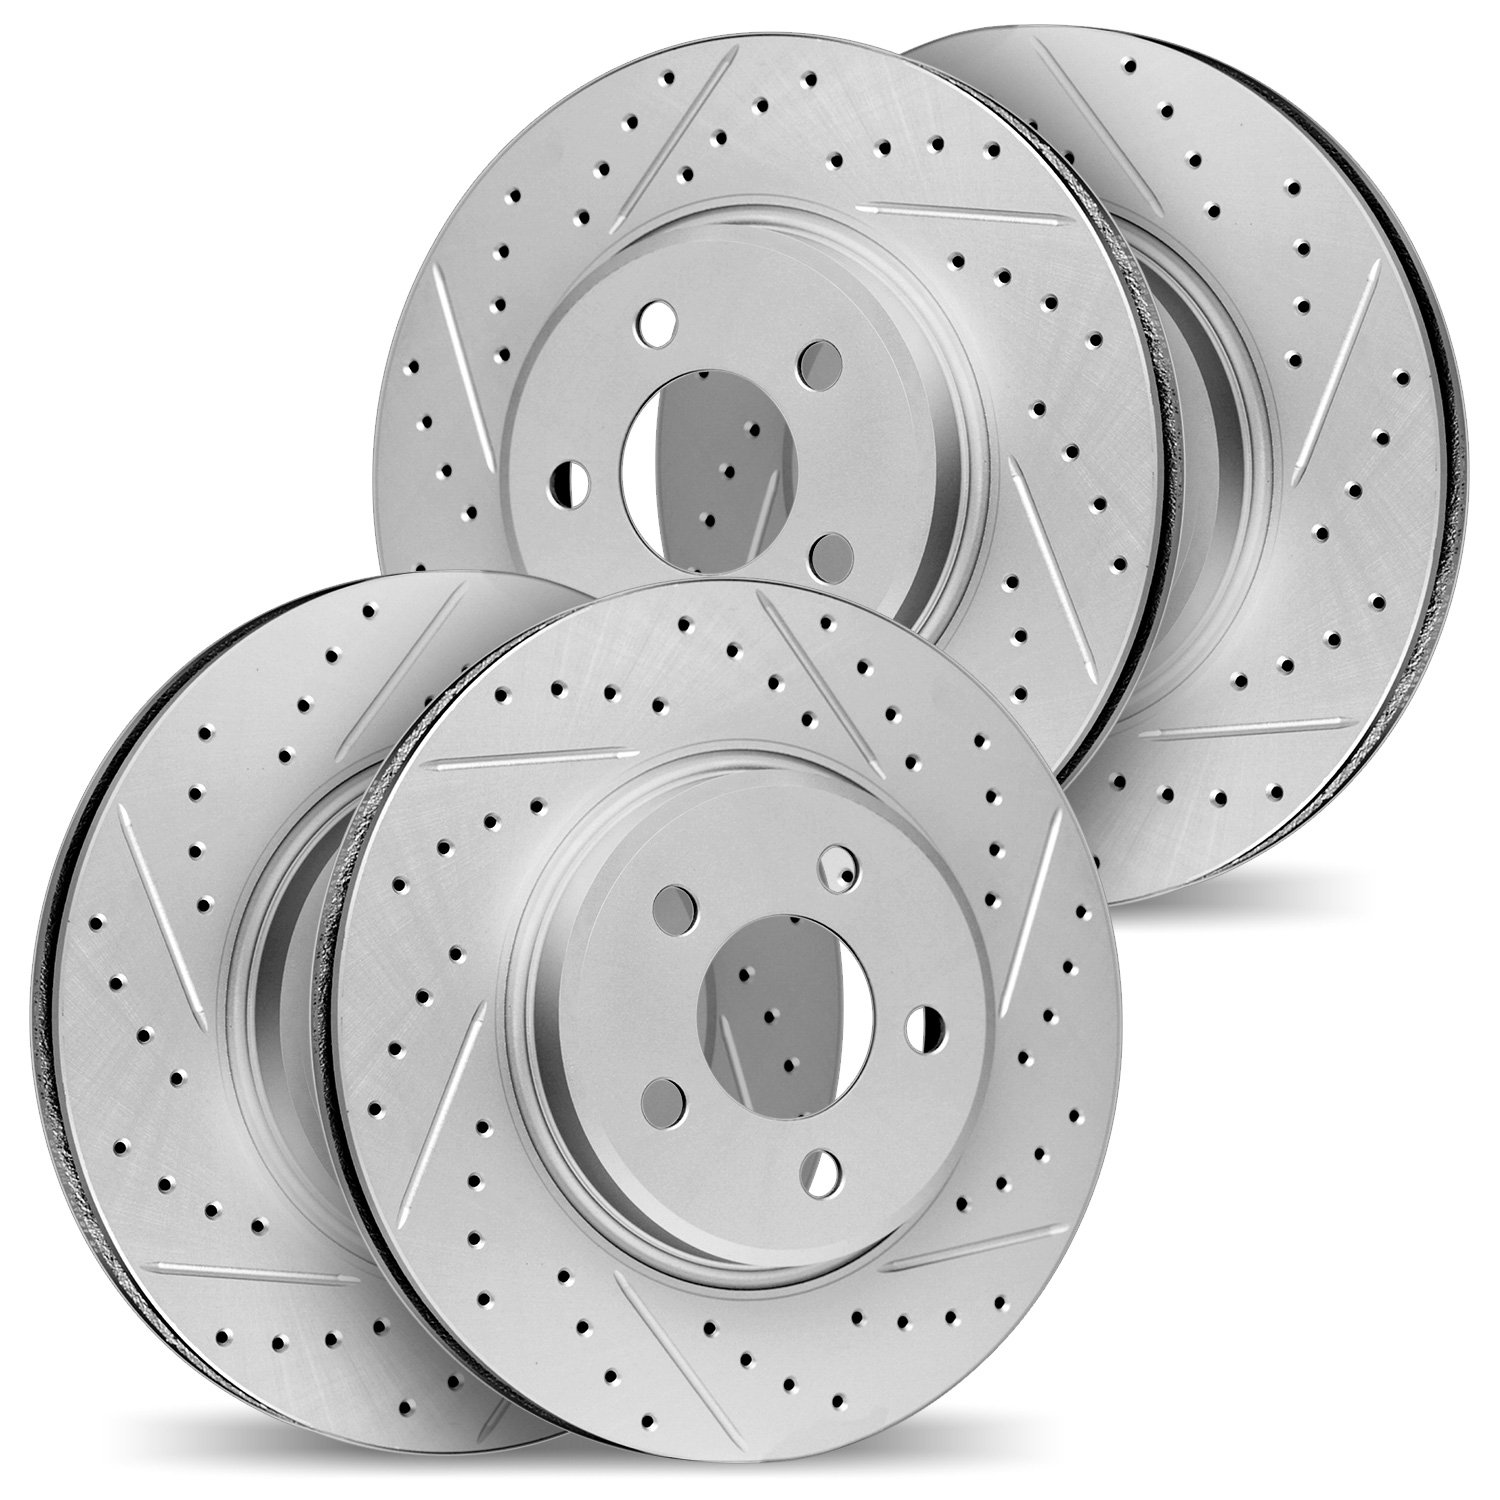 2004-13003 Geoperformance Drilled/Slotted Brake Rotors, Fits Select Subaru, Position: Front and Rear